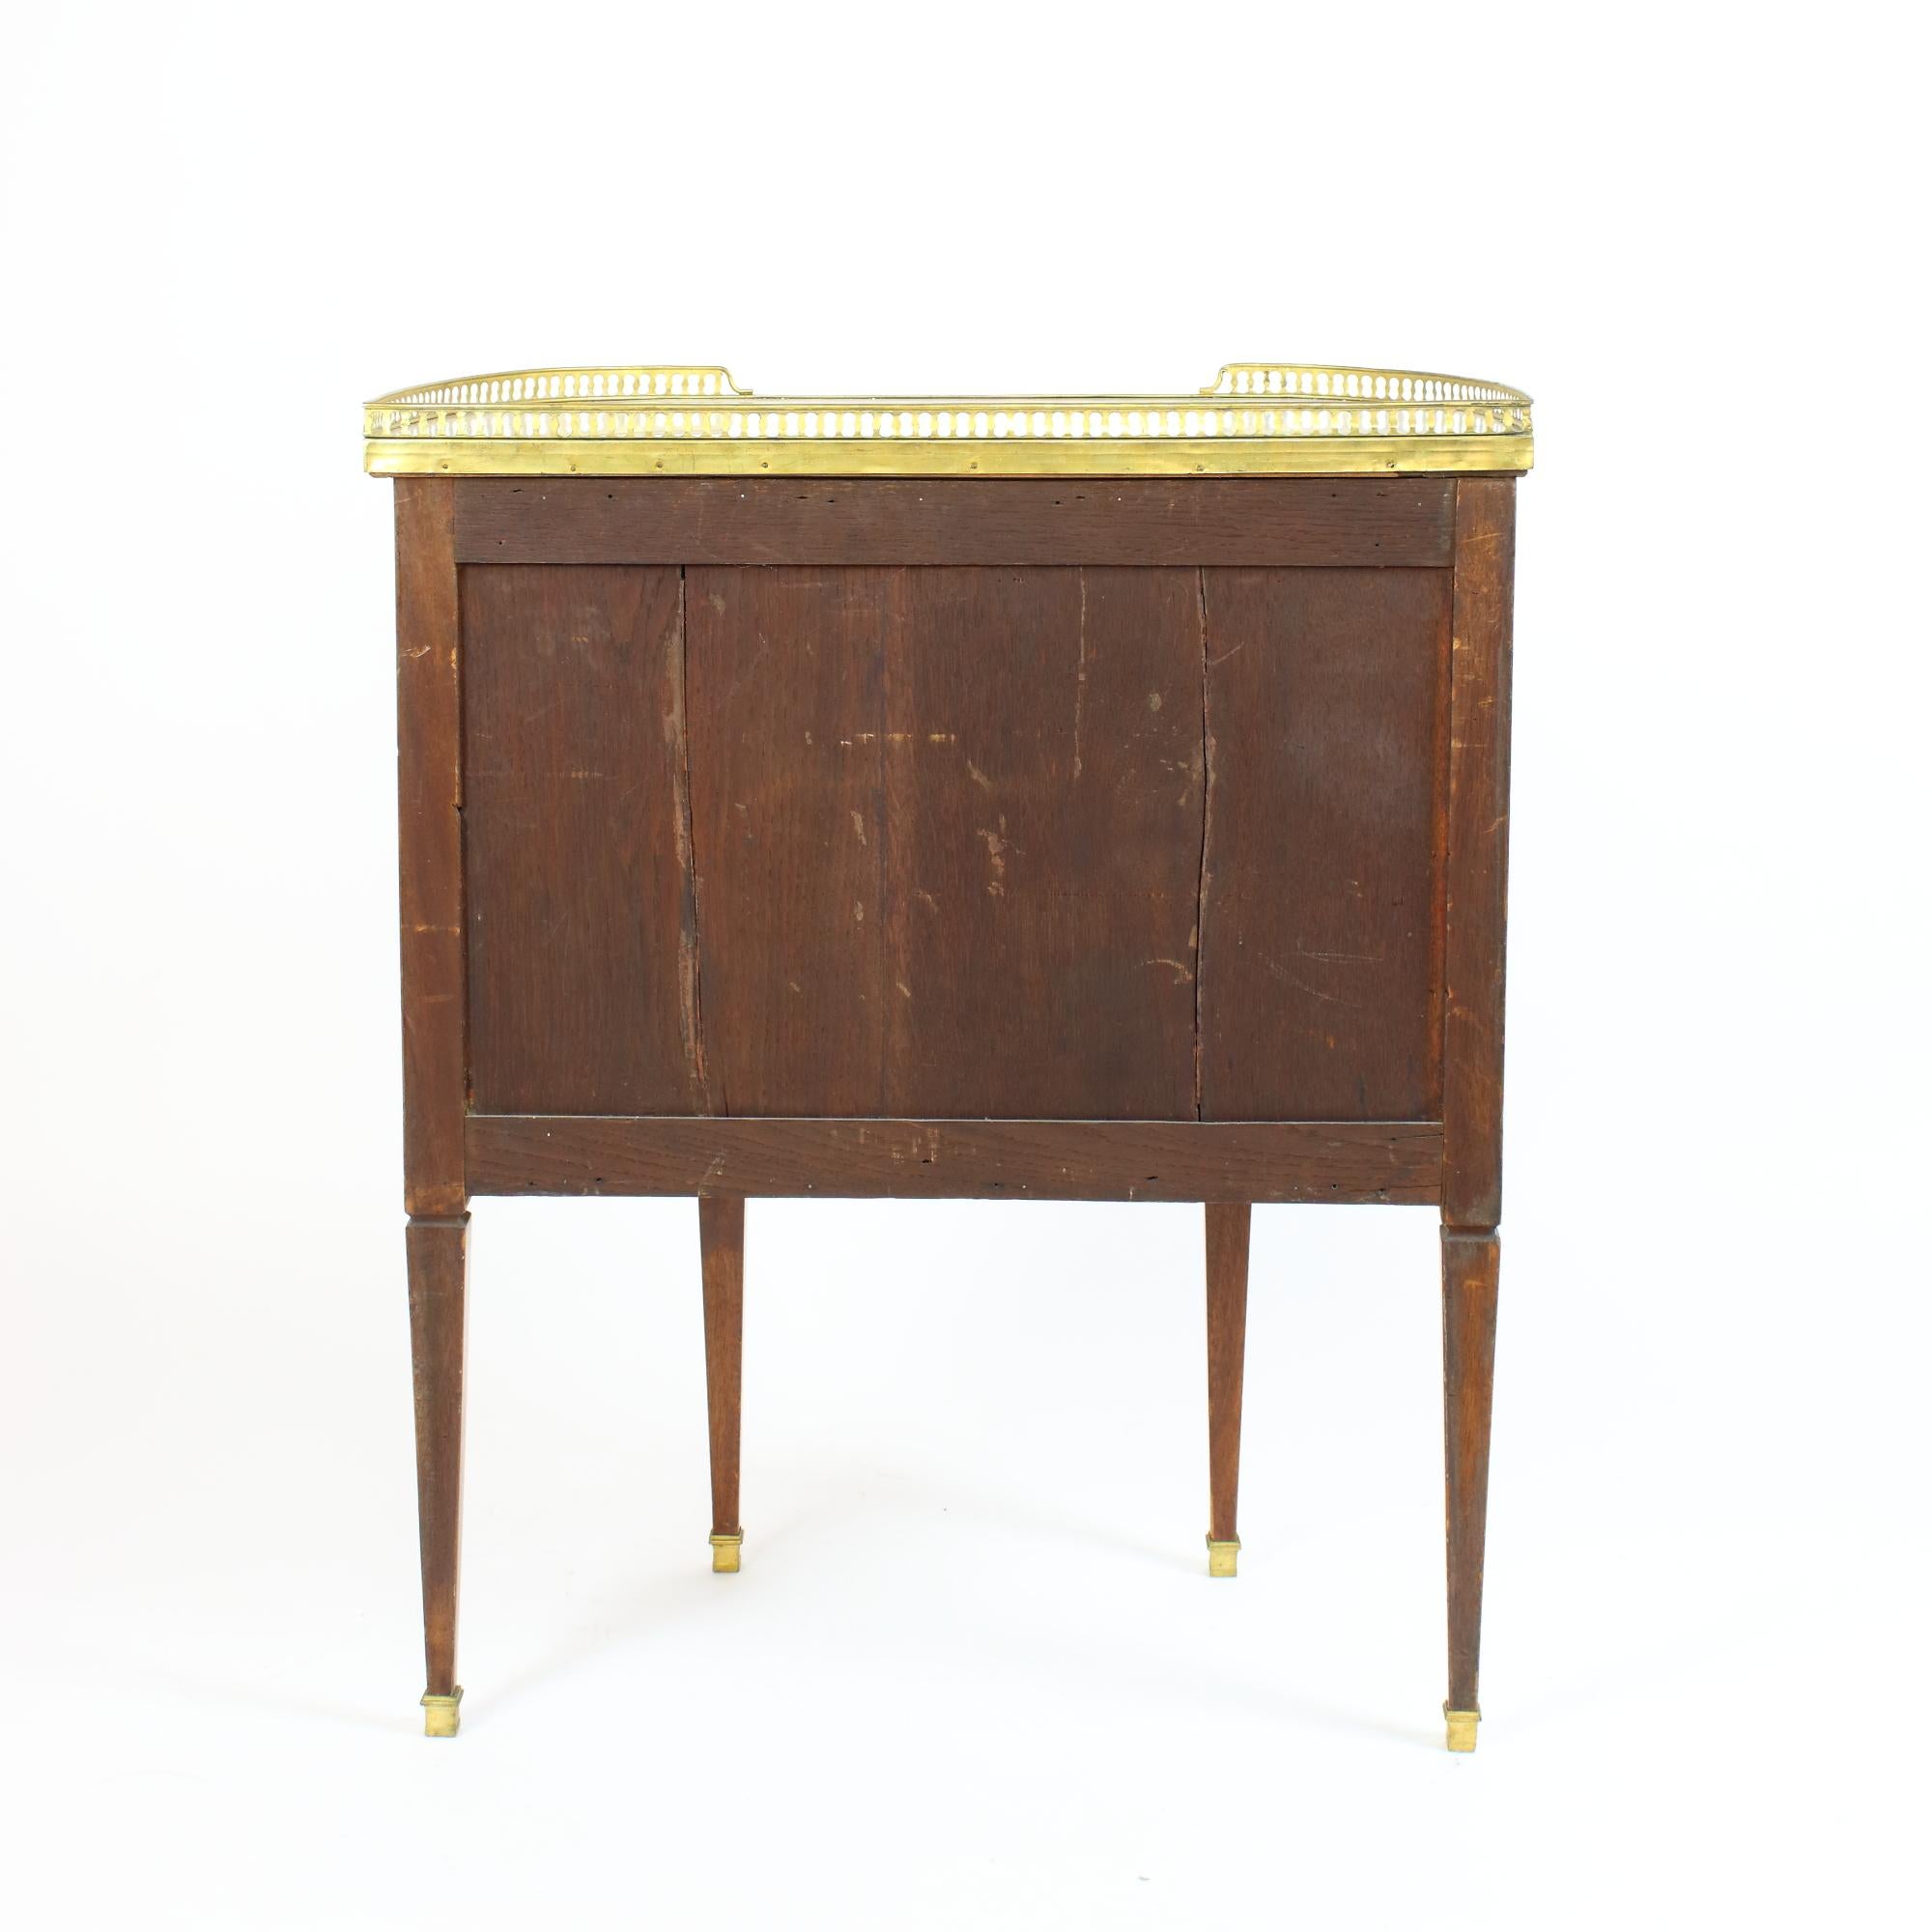 Bronze Late 18th Century Louis XVI Walnut Demilune Commode or Table Chiffonière For Sale